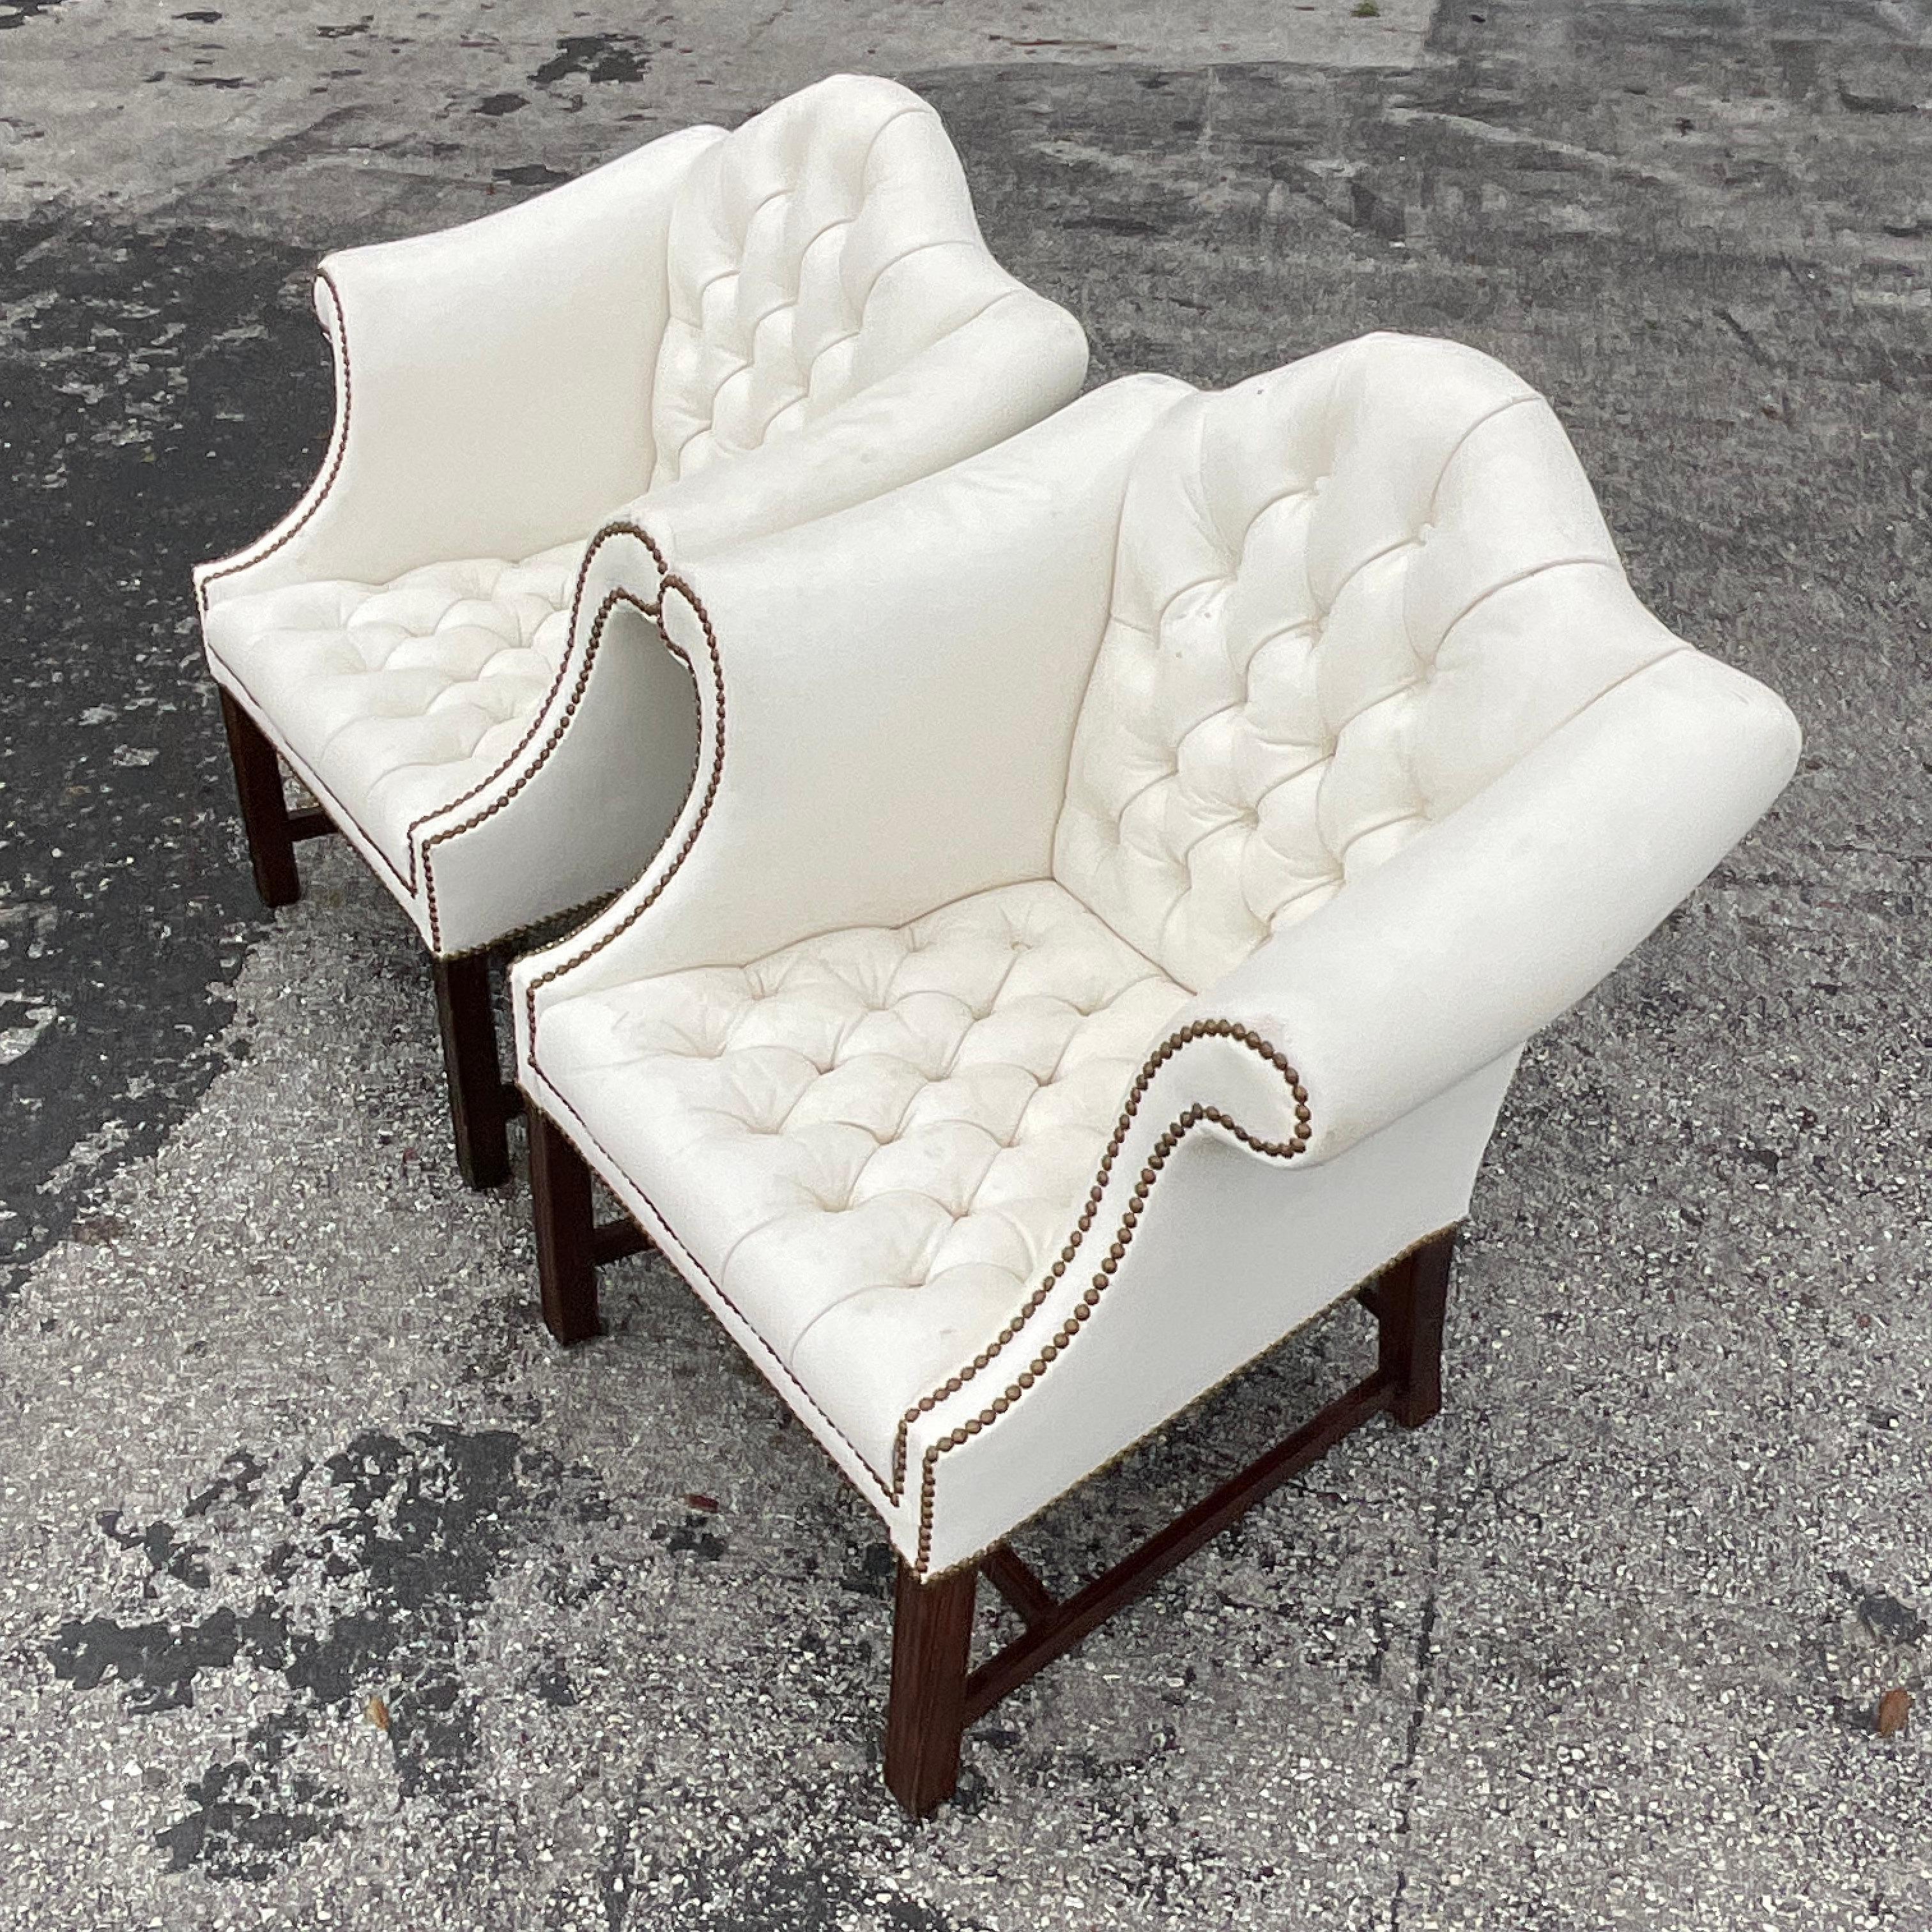 Vintage Traditional Camel Back Tufted Leather Arm Chairs - a Pair For Sale 3